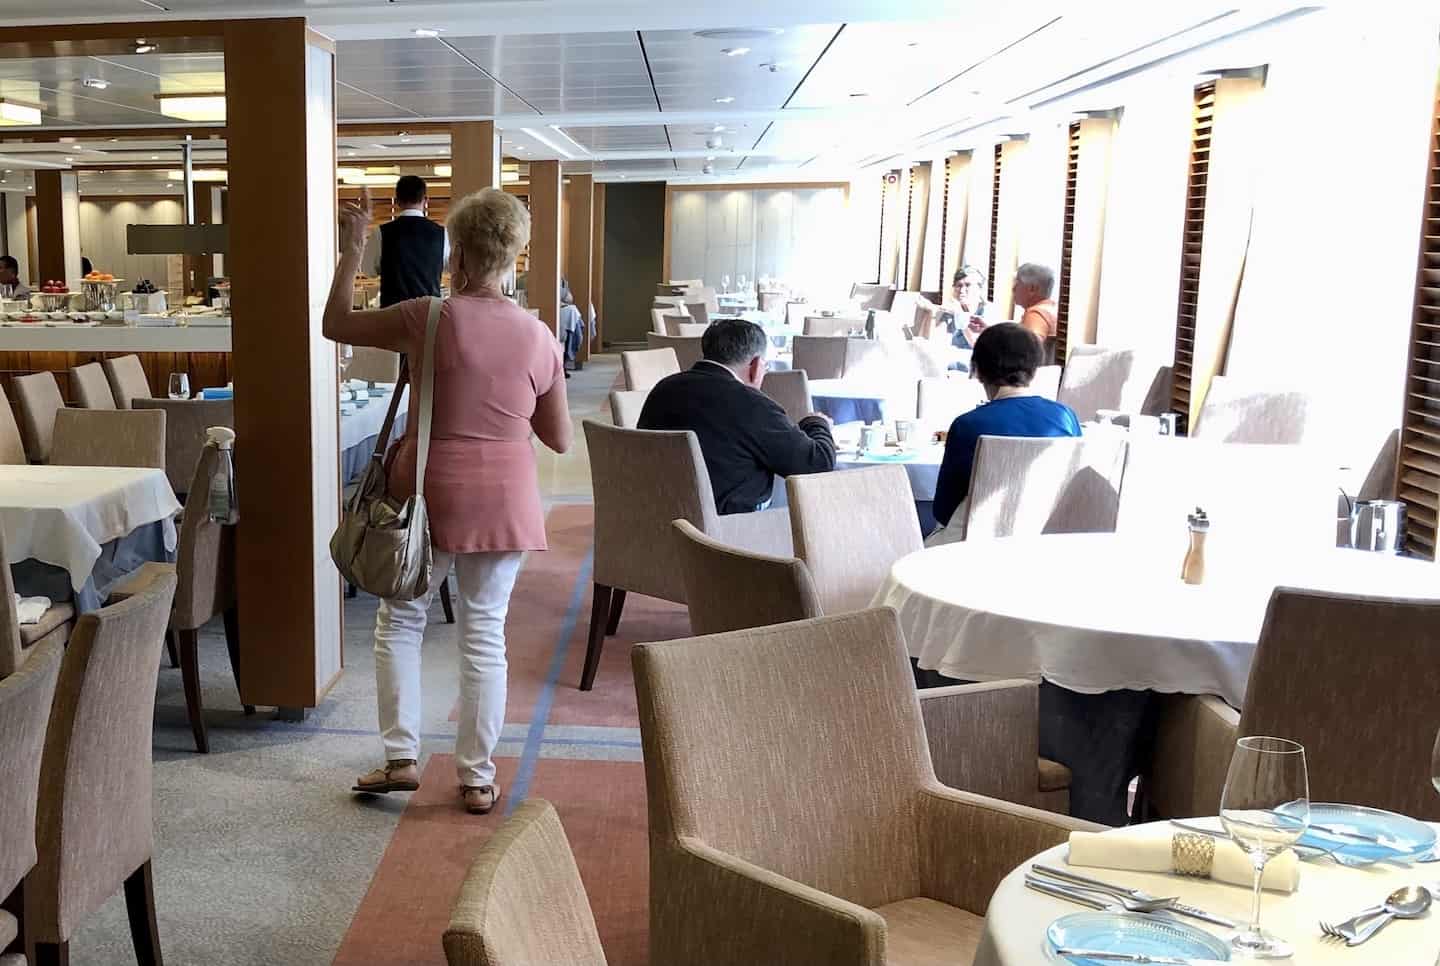 Diners are finishing their meals in the restaurant aboard a Viking river cruise.